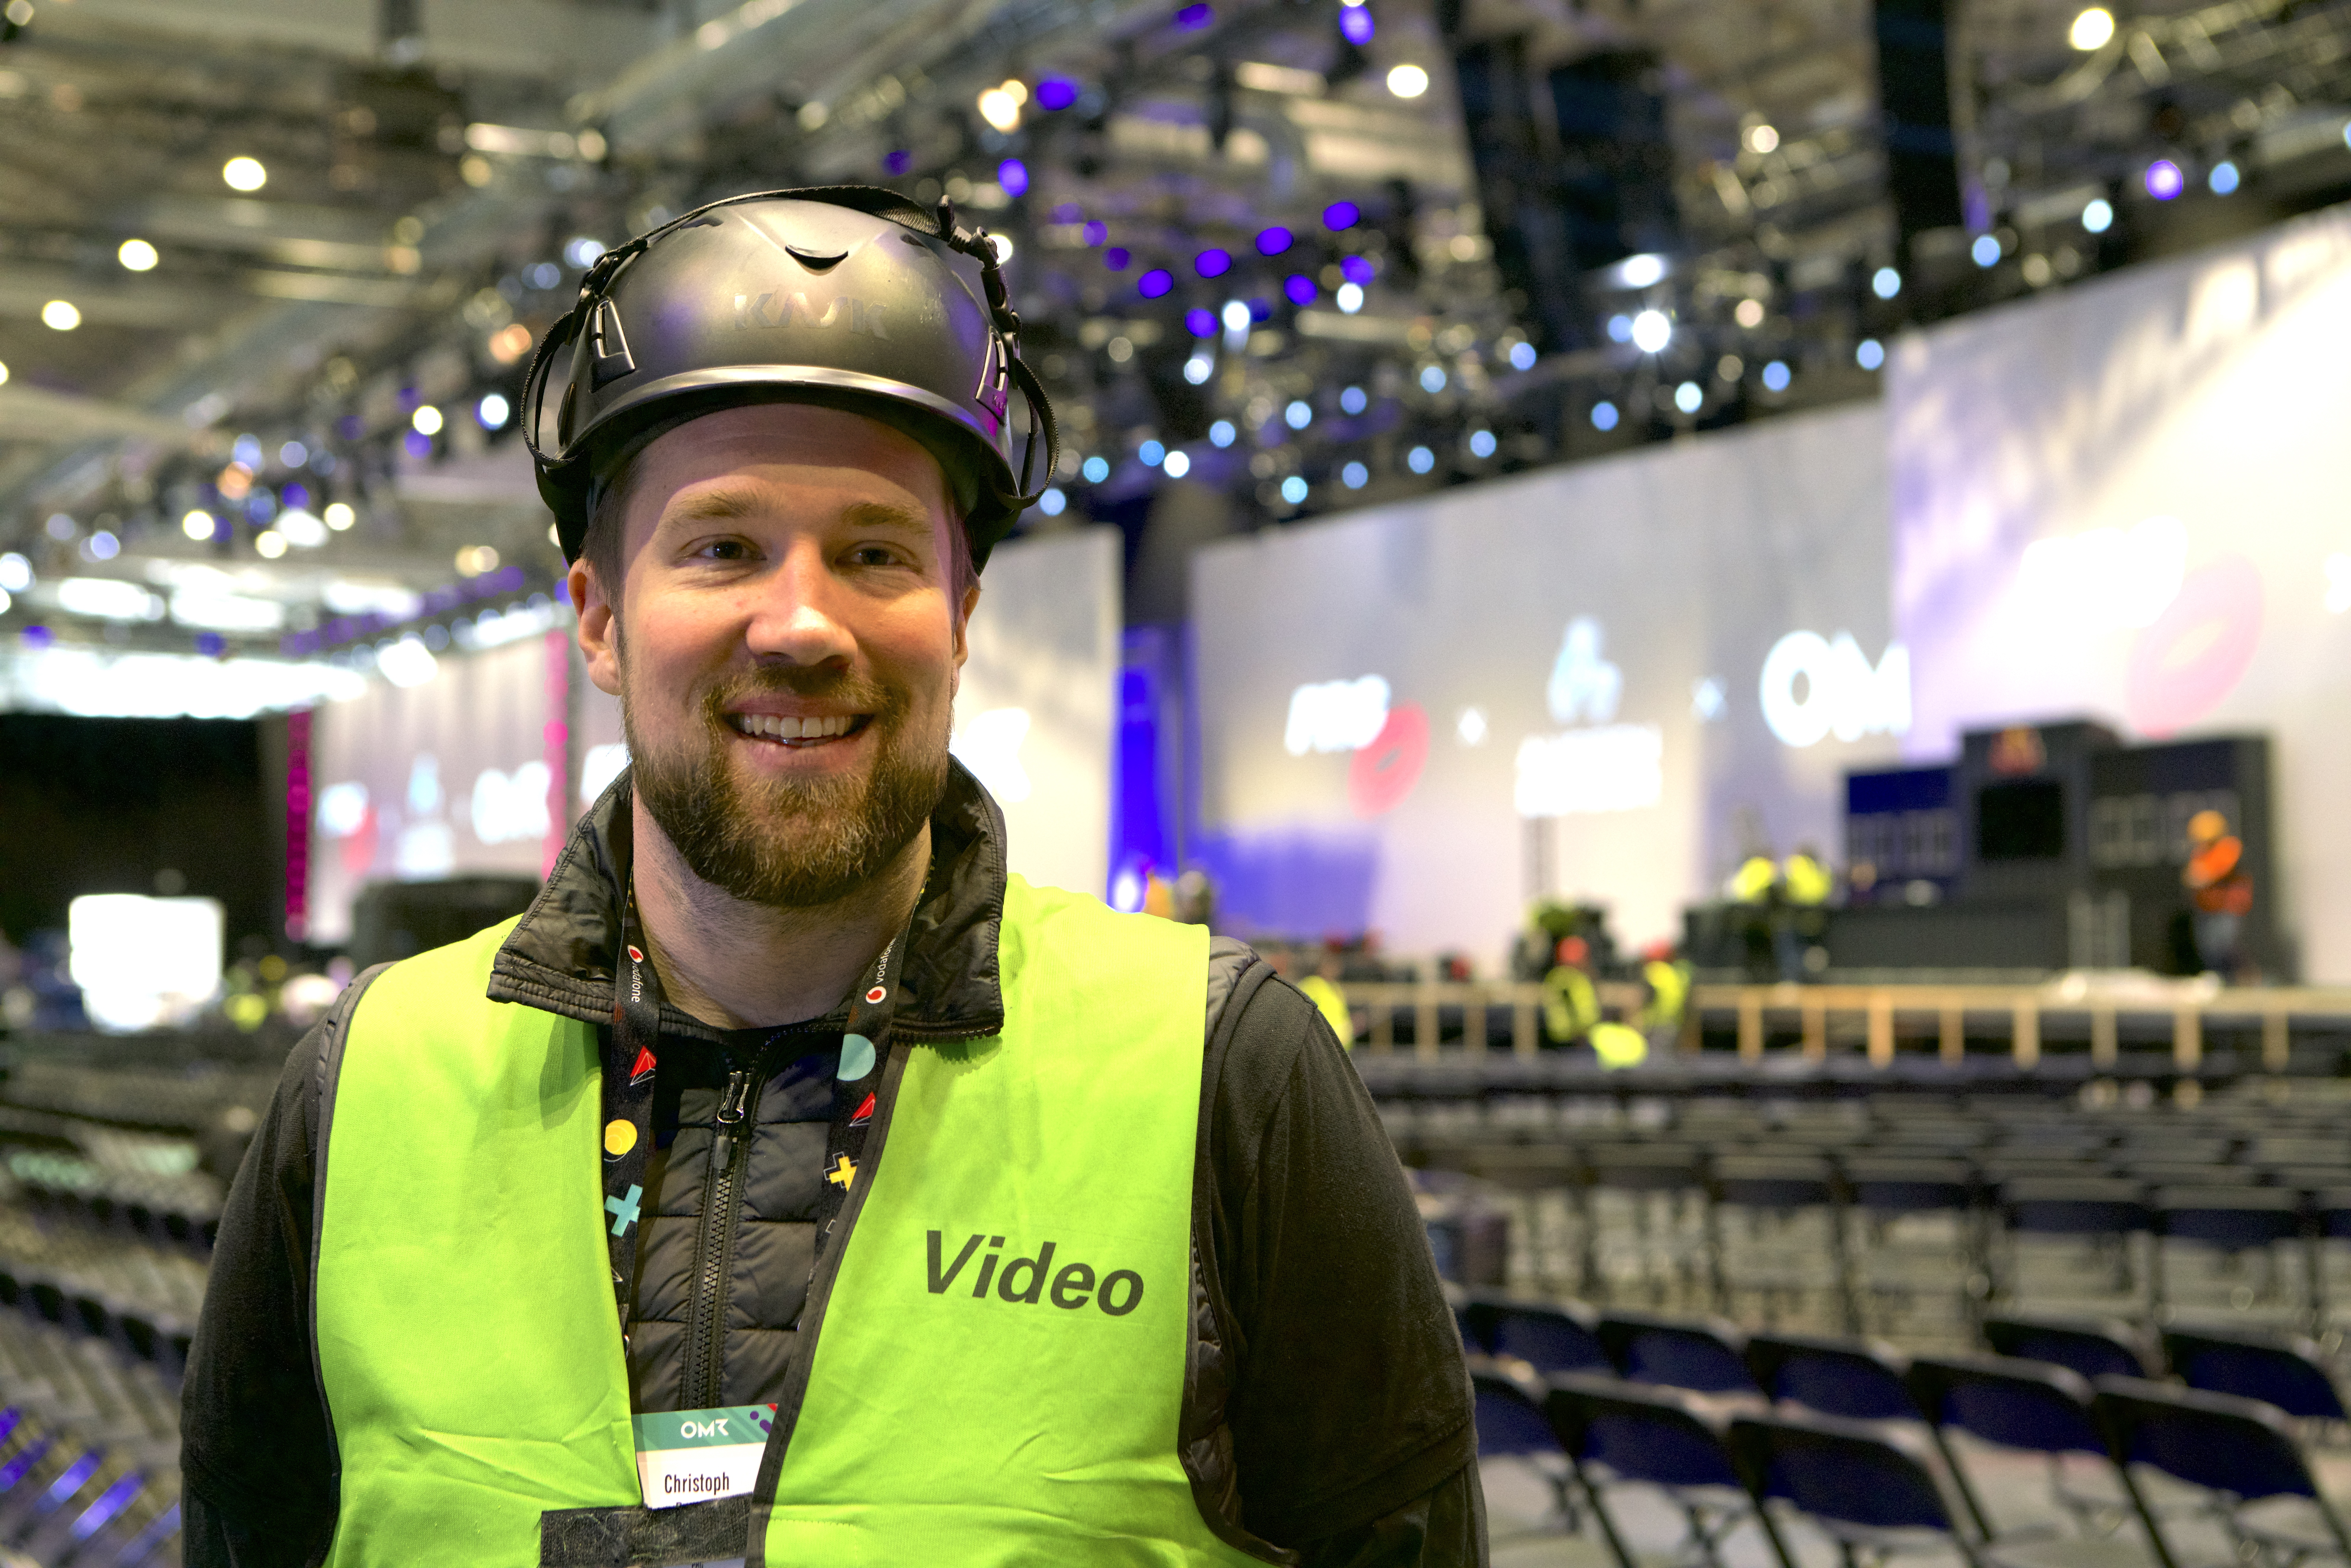 Meet Team PRG at the OMR. Christoph Petratos our broadcast expert at the event.